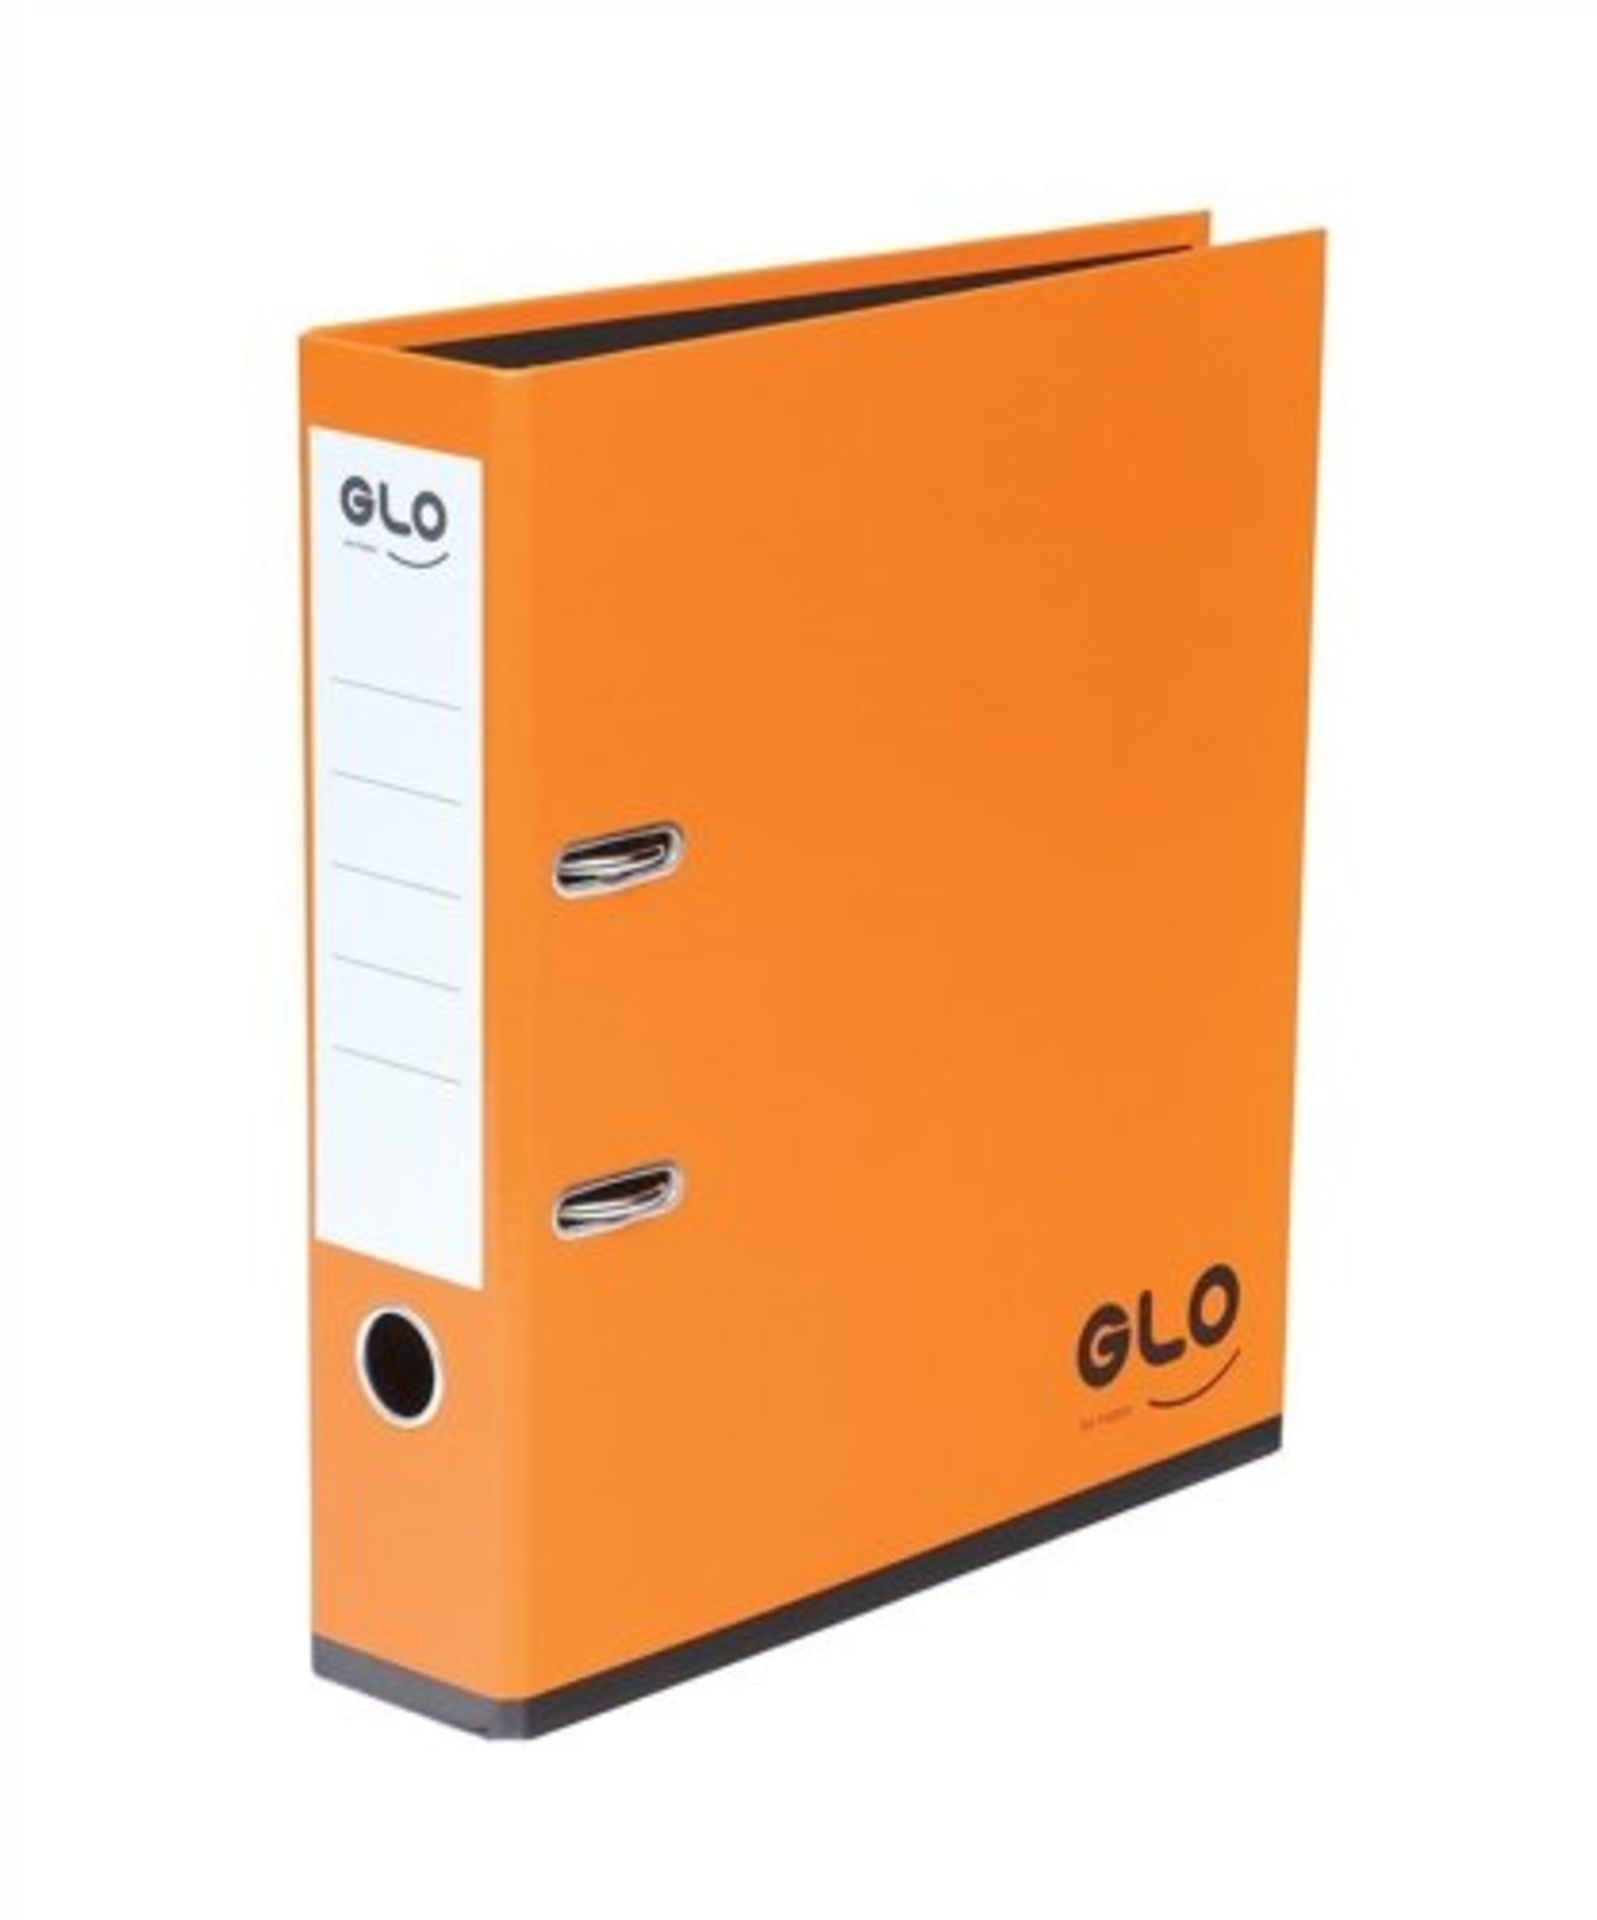 1 x Pallet of GLO Orange Lever Arch Files - Approximately 18 Boxes in Total (Online Price £35.97 Per